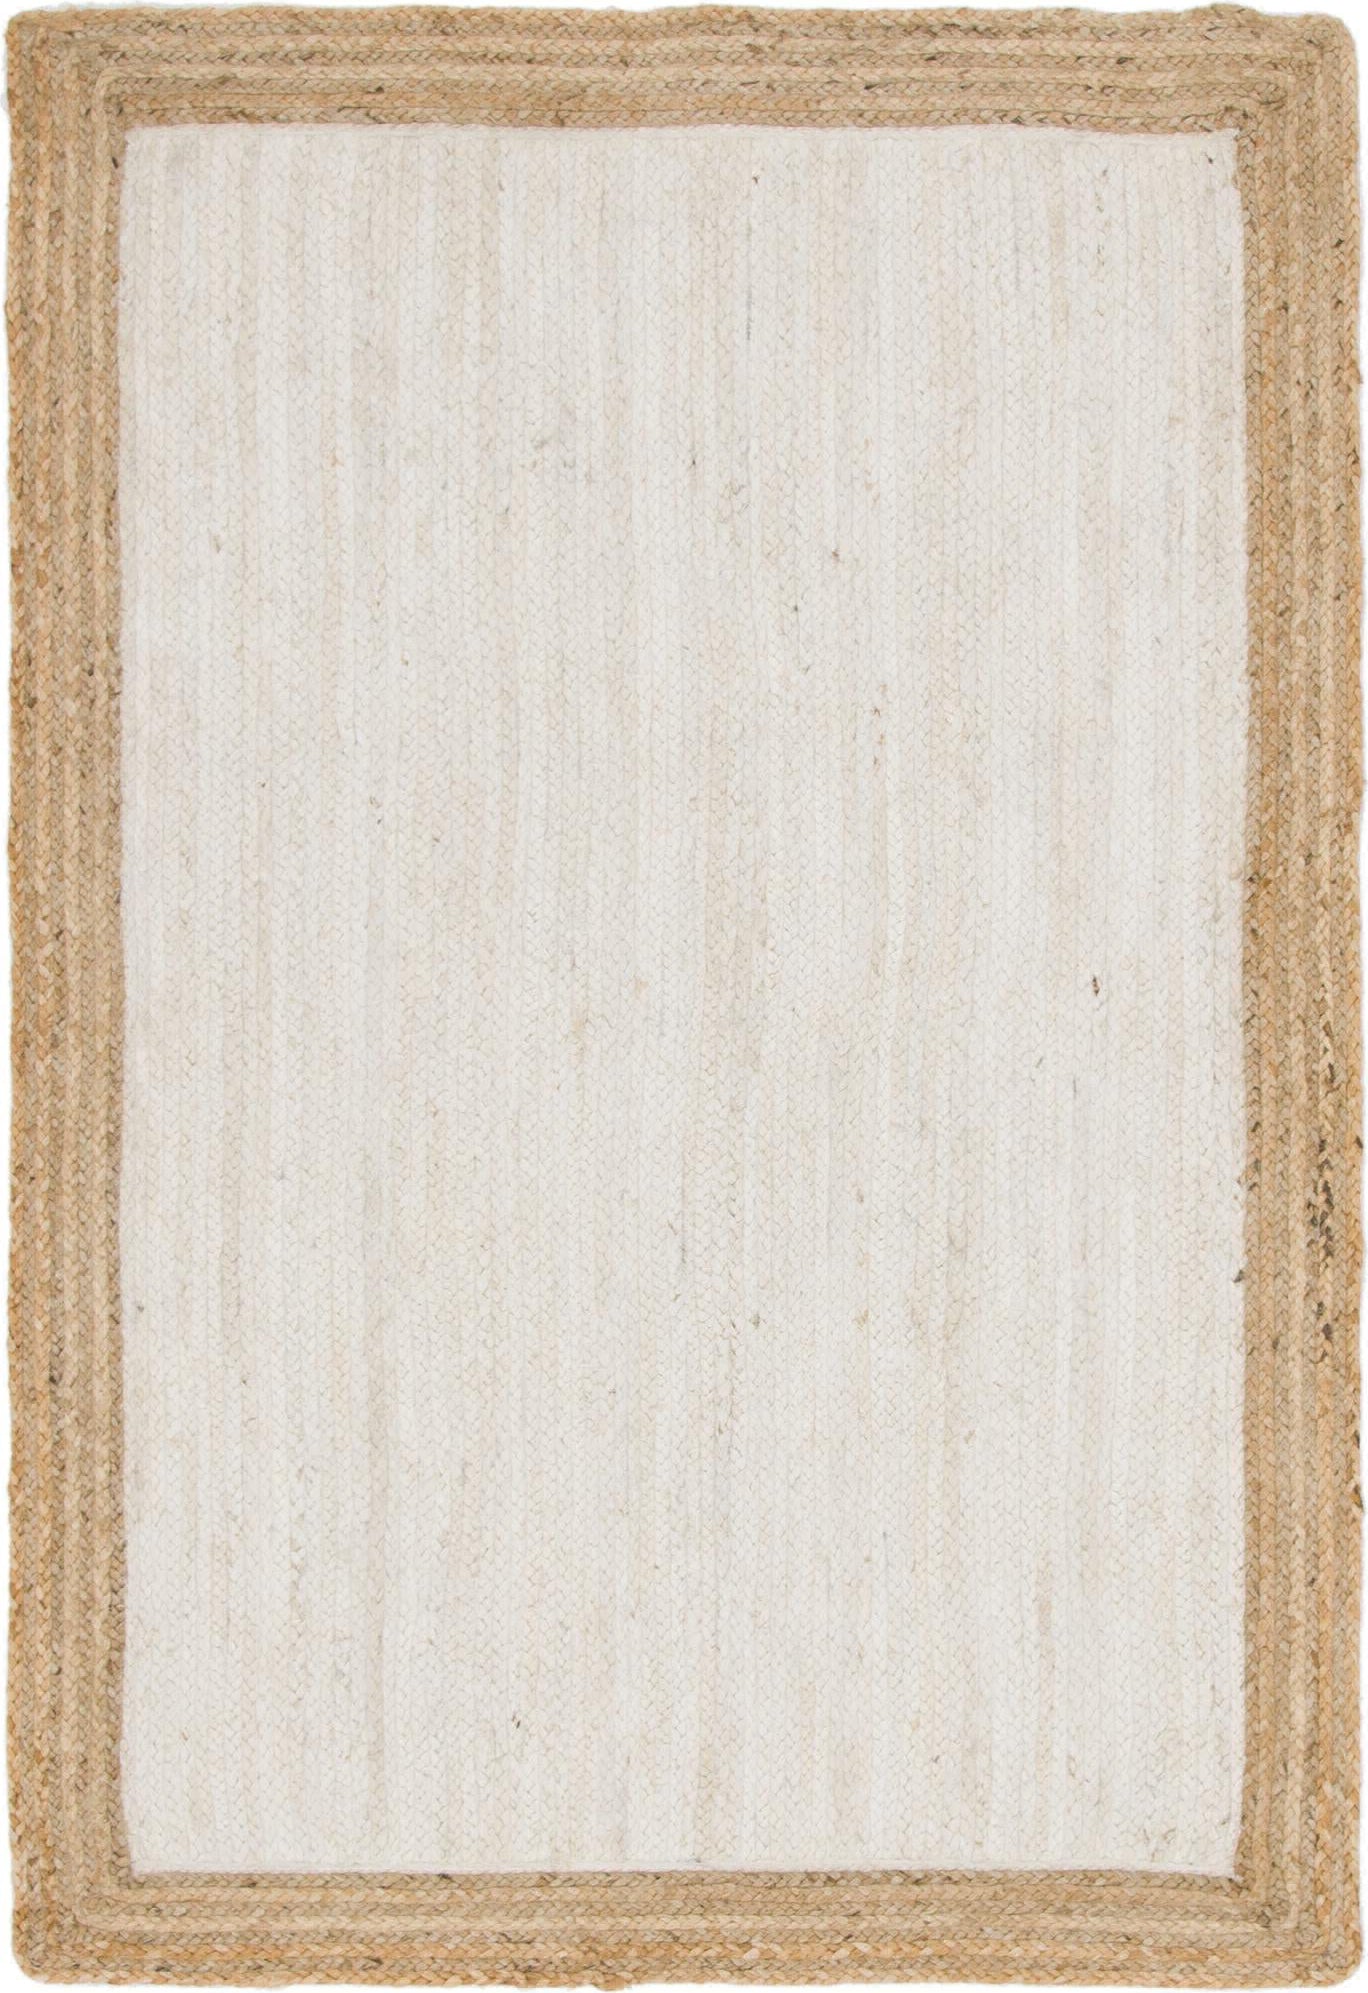 Unique Loom Braided Jute MGN-4 White Area Rug main image